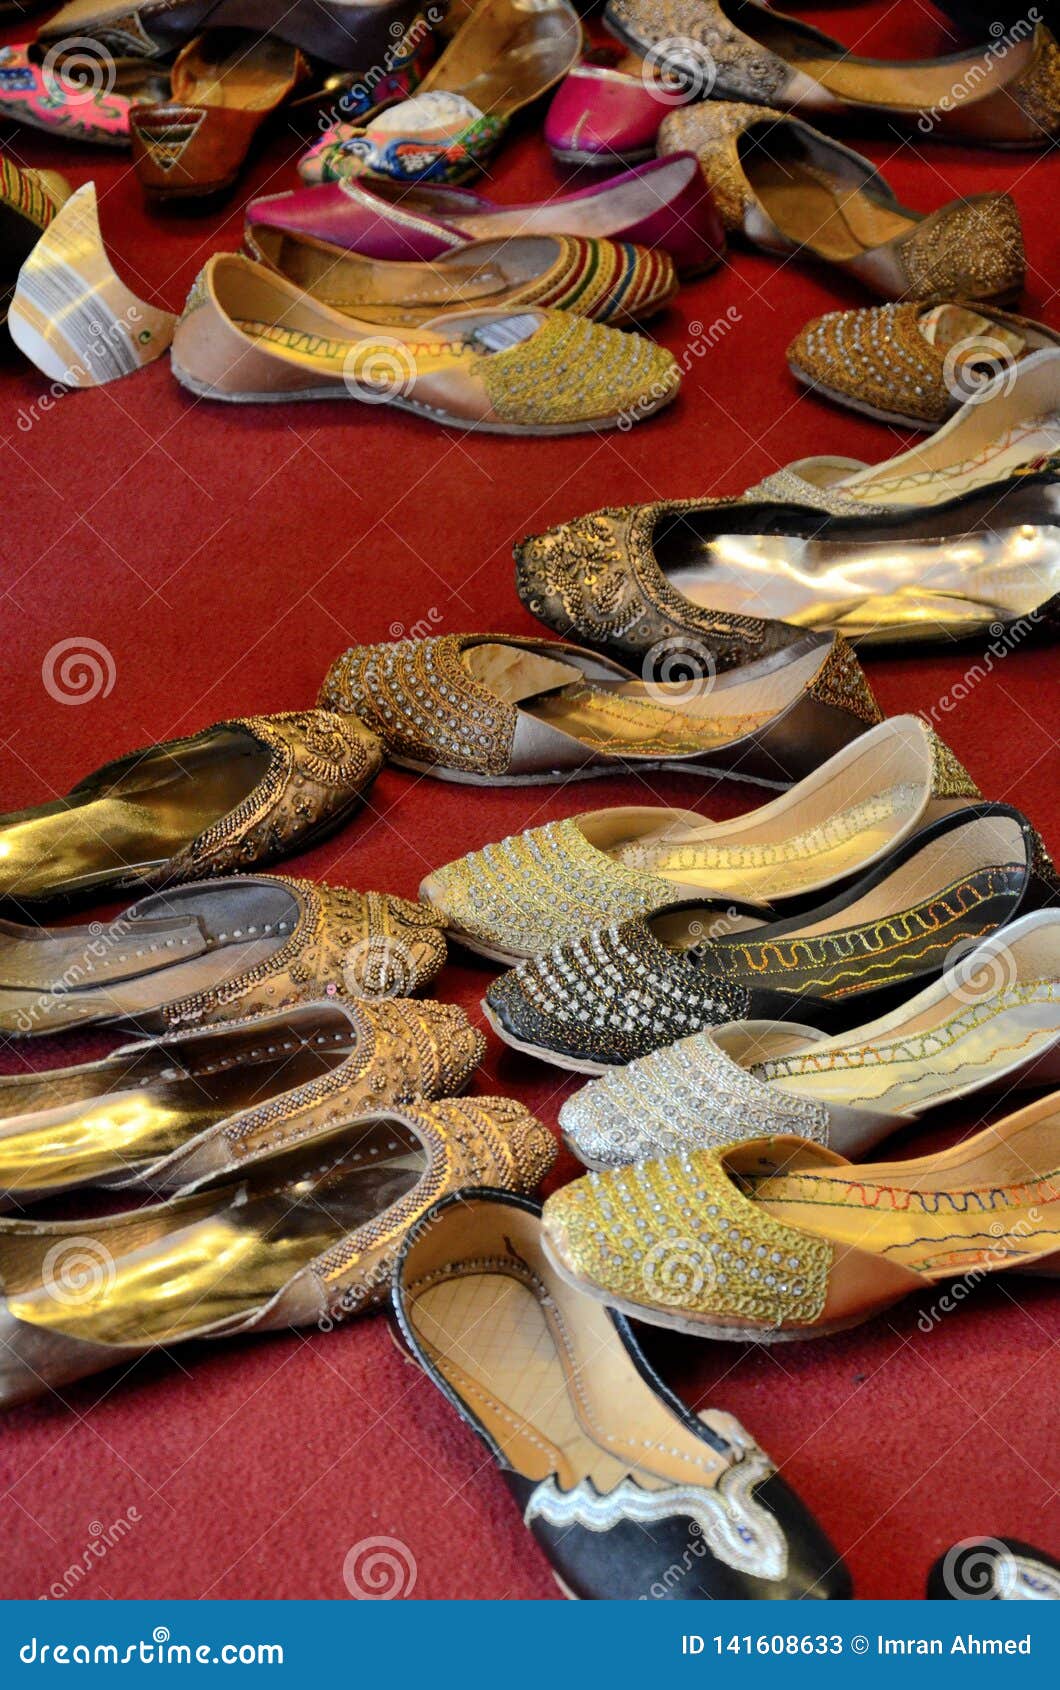 Brand New Hand Made Leather Designed Khusa Shoes at Shop Karachi ...